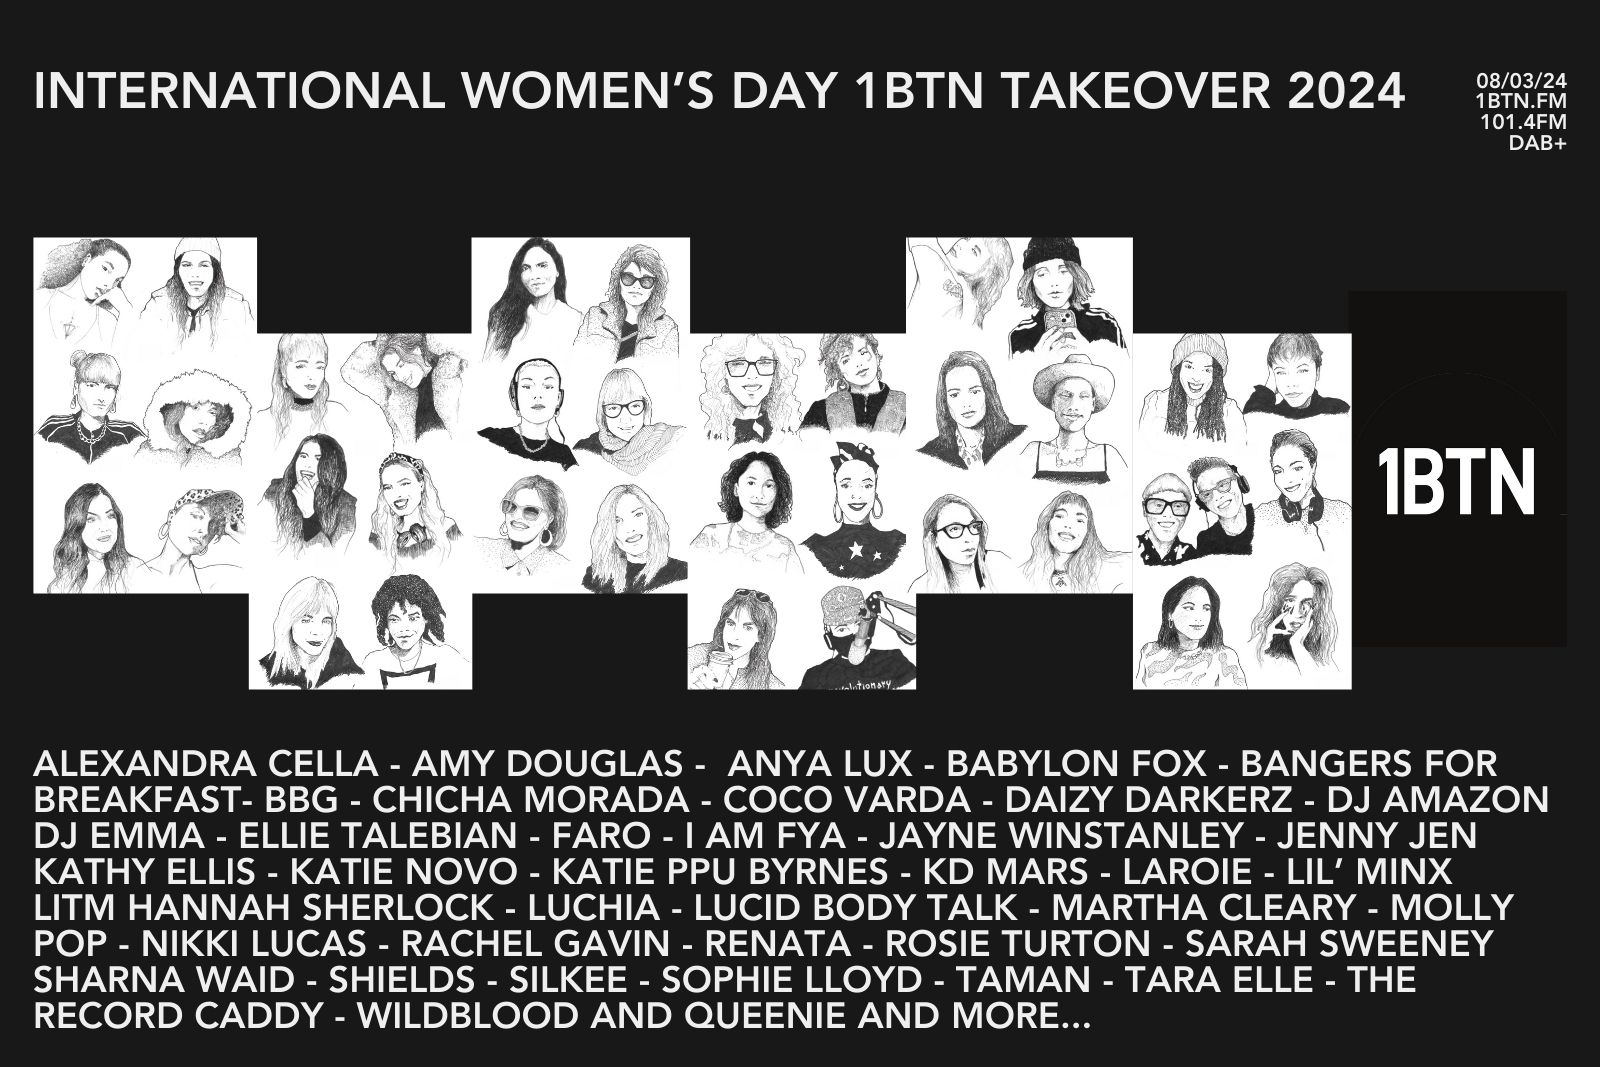 1BTN’s International Women’s Day Takeover to return on March 8 – bigger, bolder and better than before